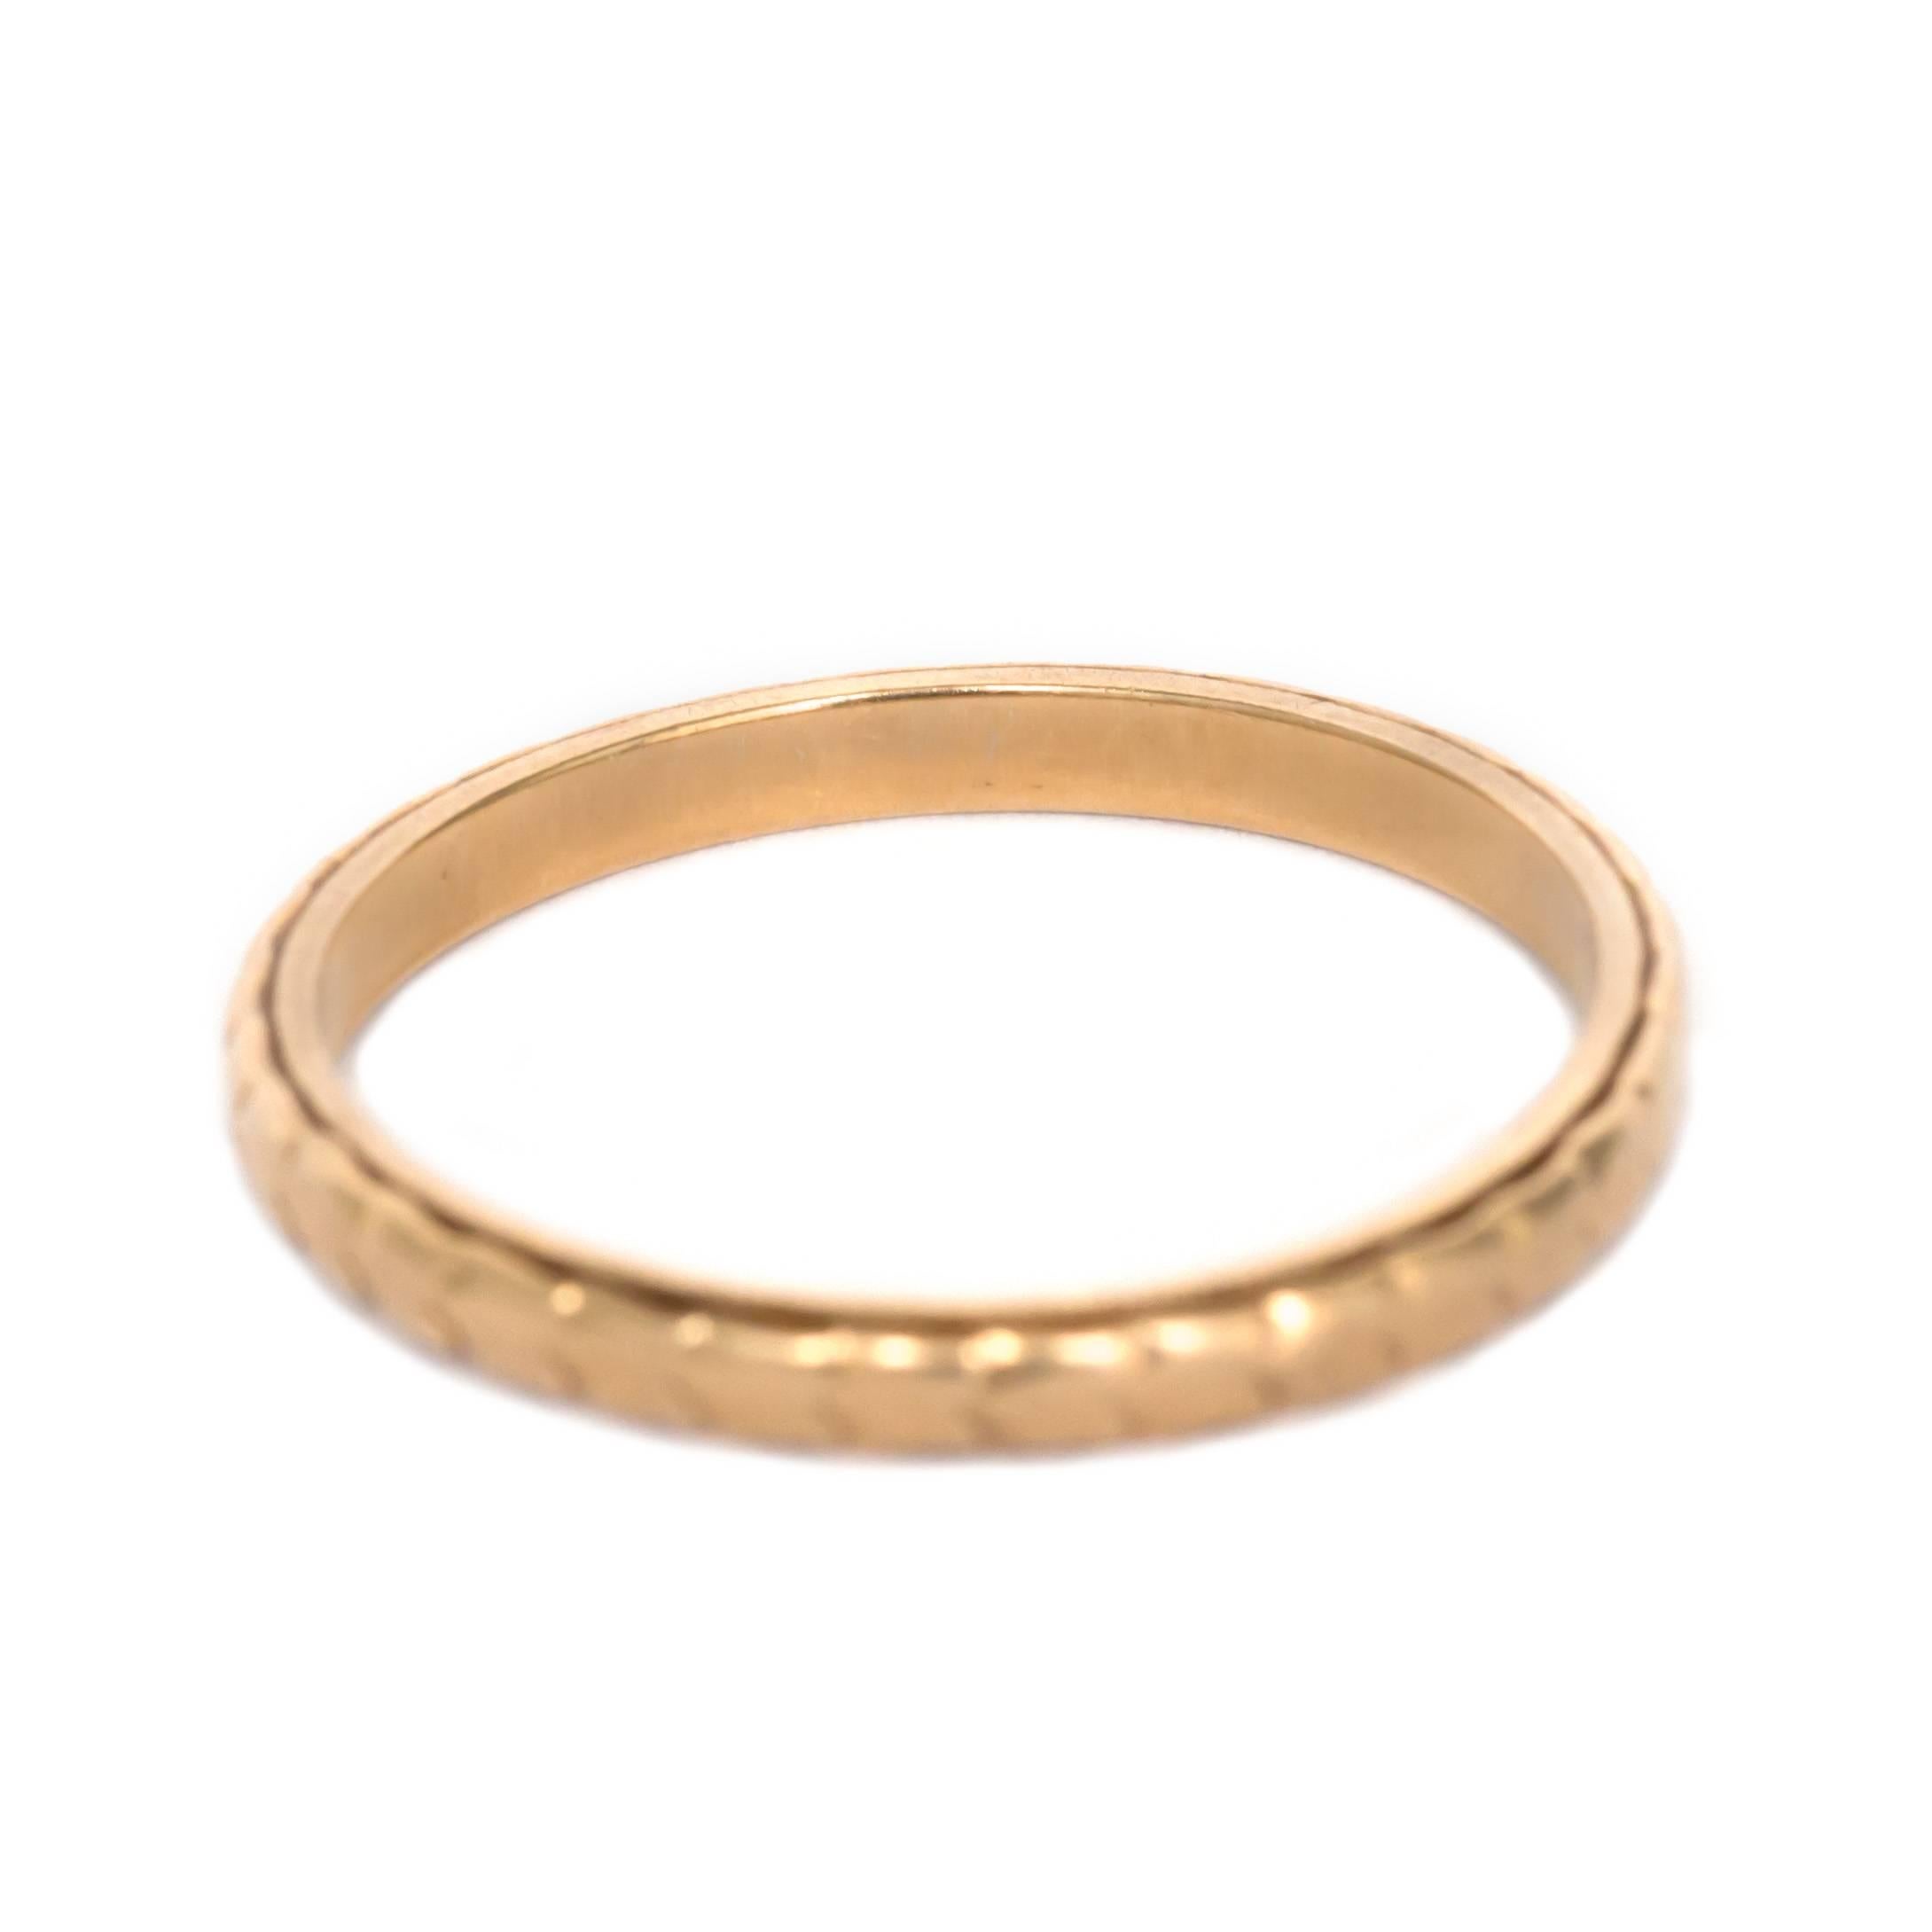 Item Details: 
Ring Size: 5.25
Metal Type: 14 Karat Yellow Gold 
Weight: 1.3 grams

Finger to Top of Stone Measurement: 1.19mm
Width: 1.89mm